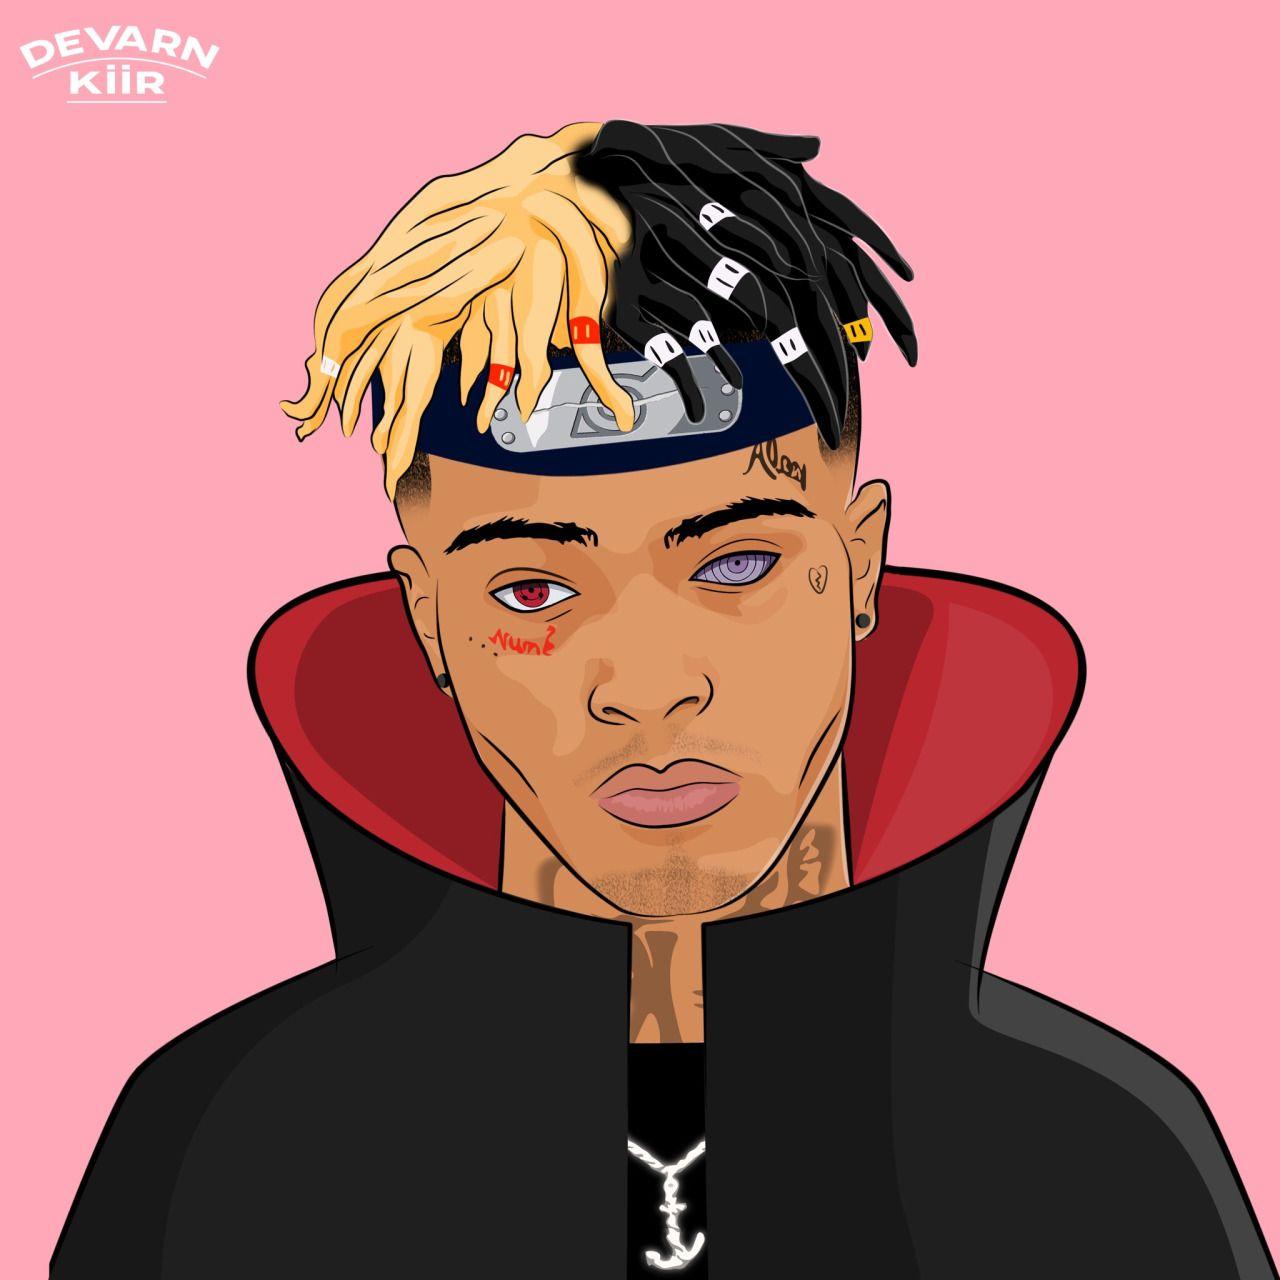 XXXTENTACION hes an other favorite artist hes very different. fav